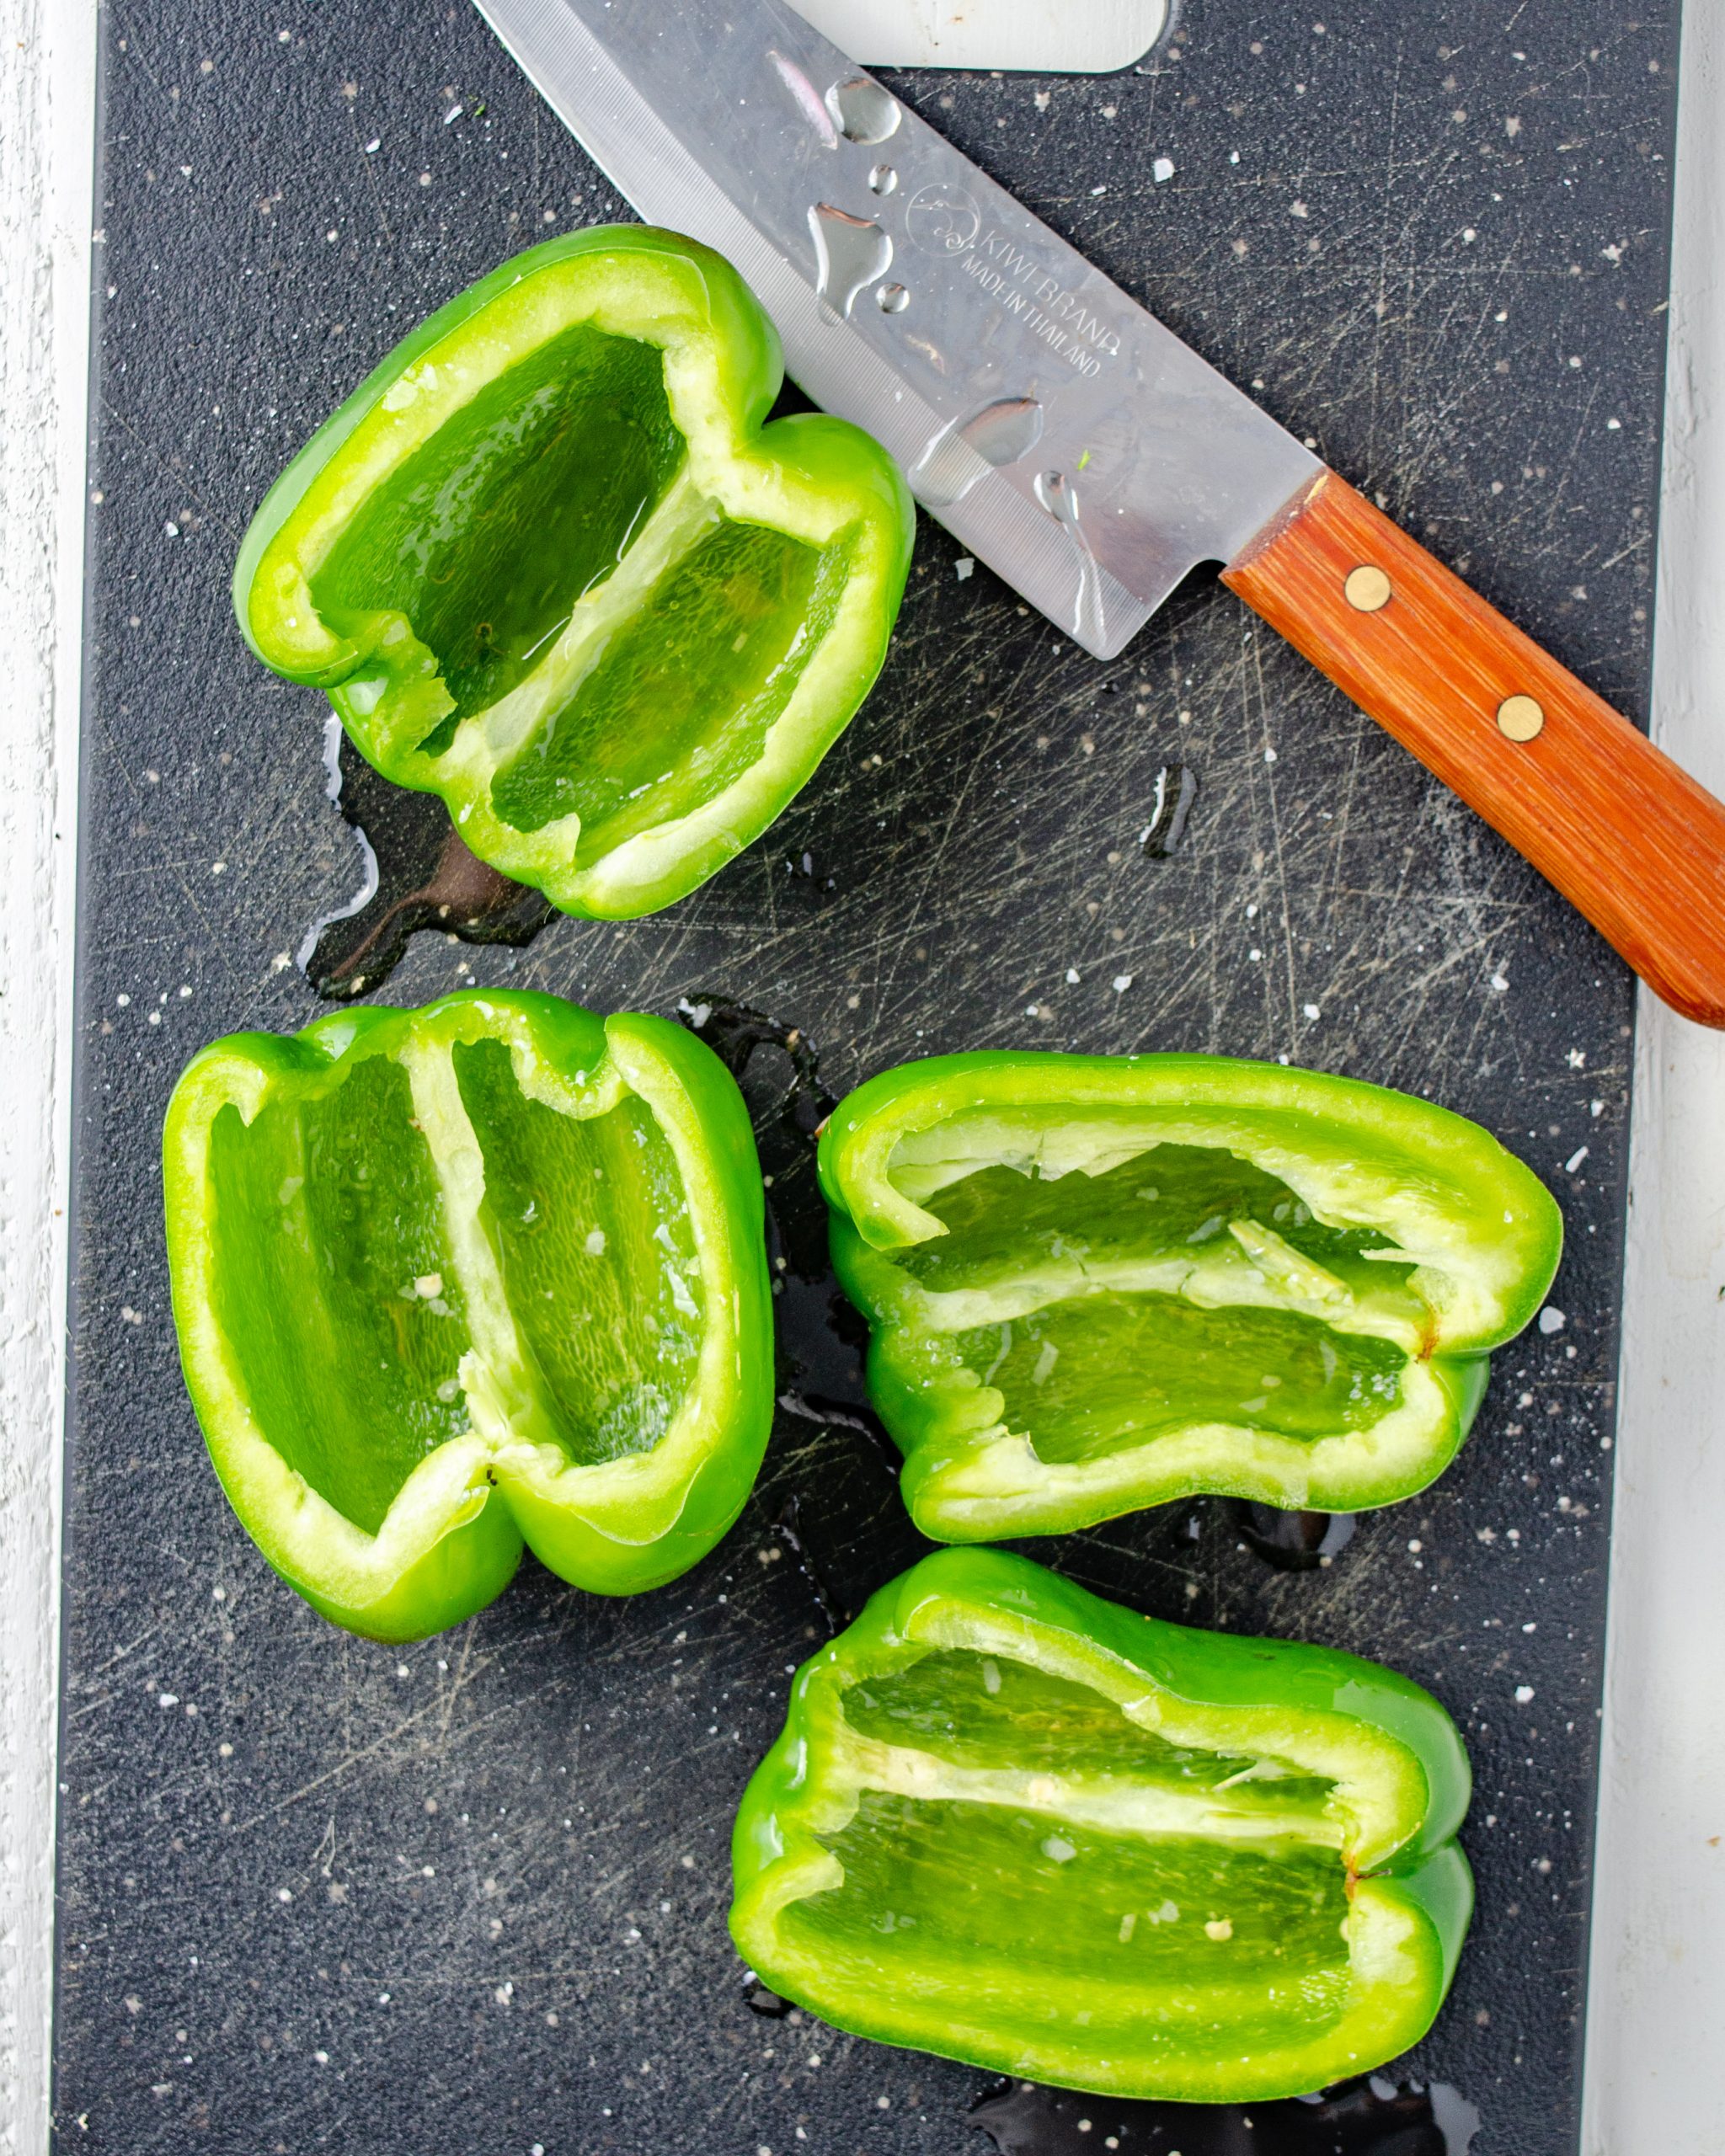 Remove the seeds from 4 green bell peppers and cut them in half lengthwise.